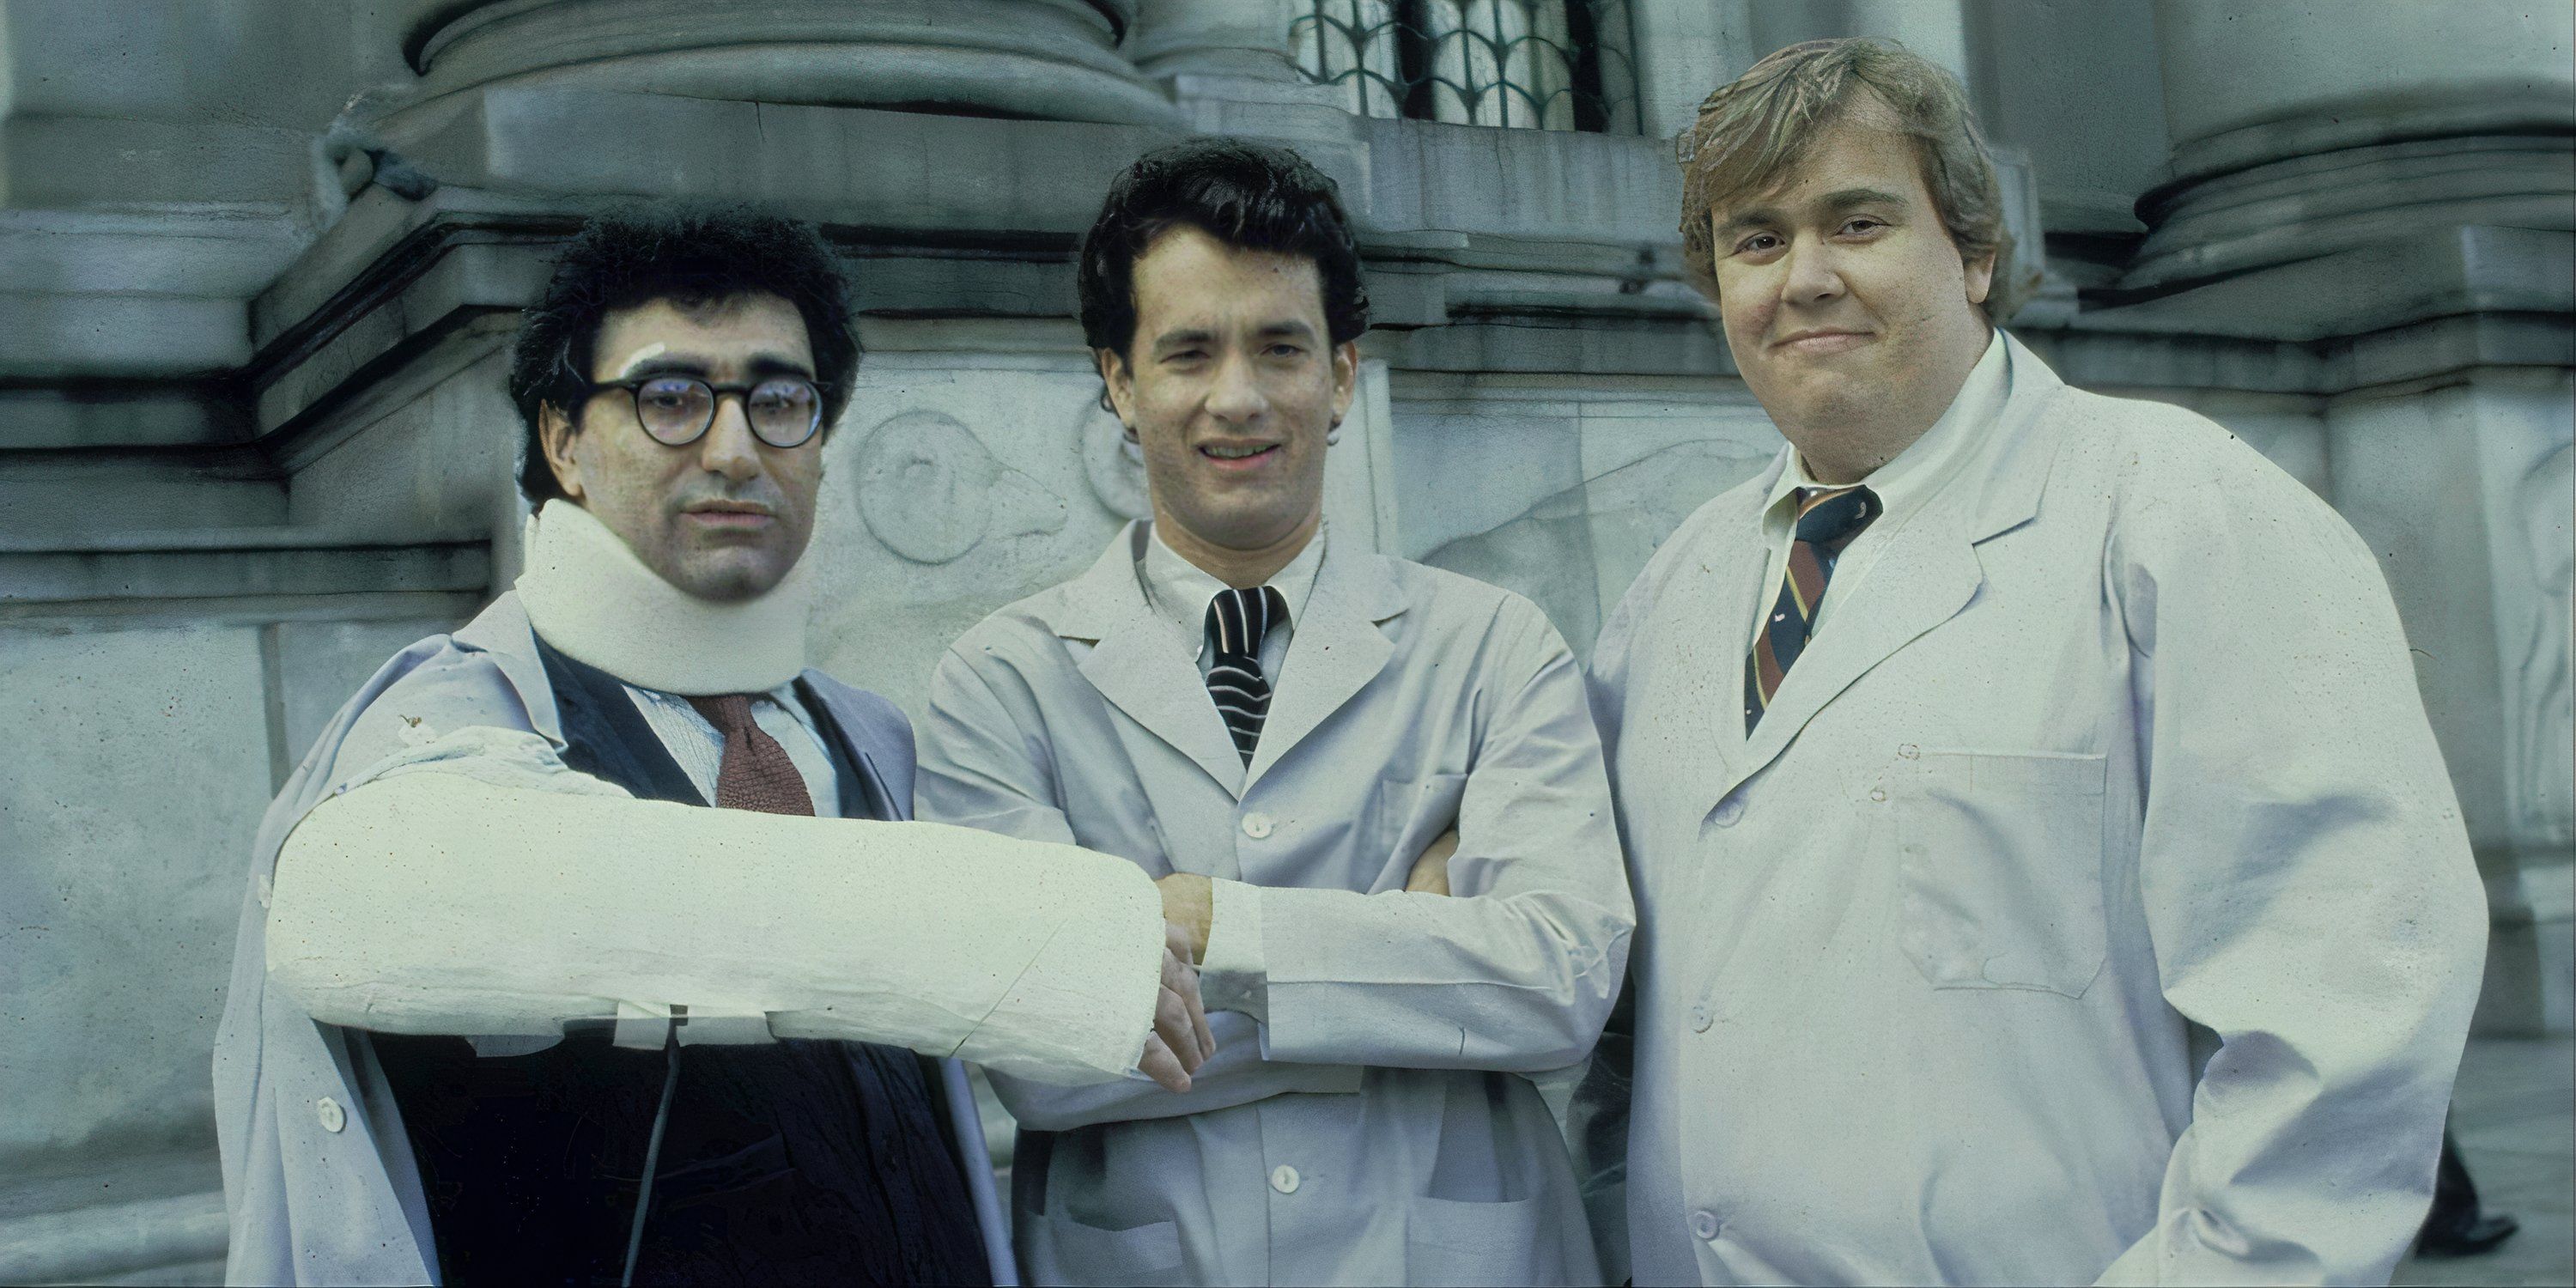 Eugene Levy, Tom Hanks and John Candy smiling at the camera in Splash.